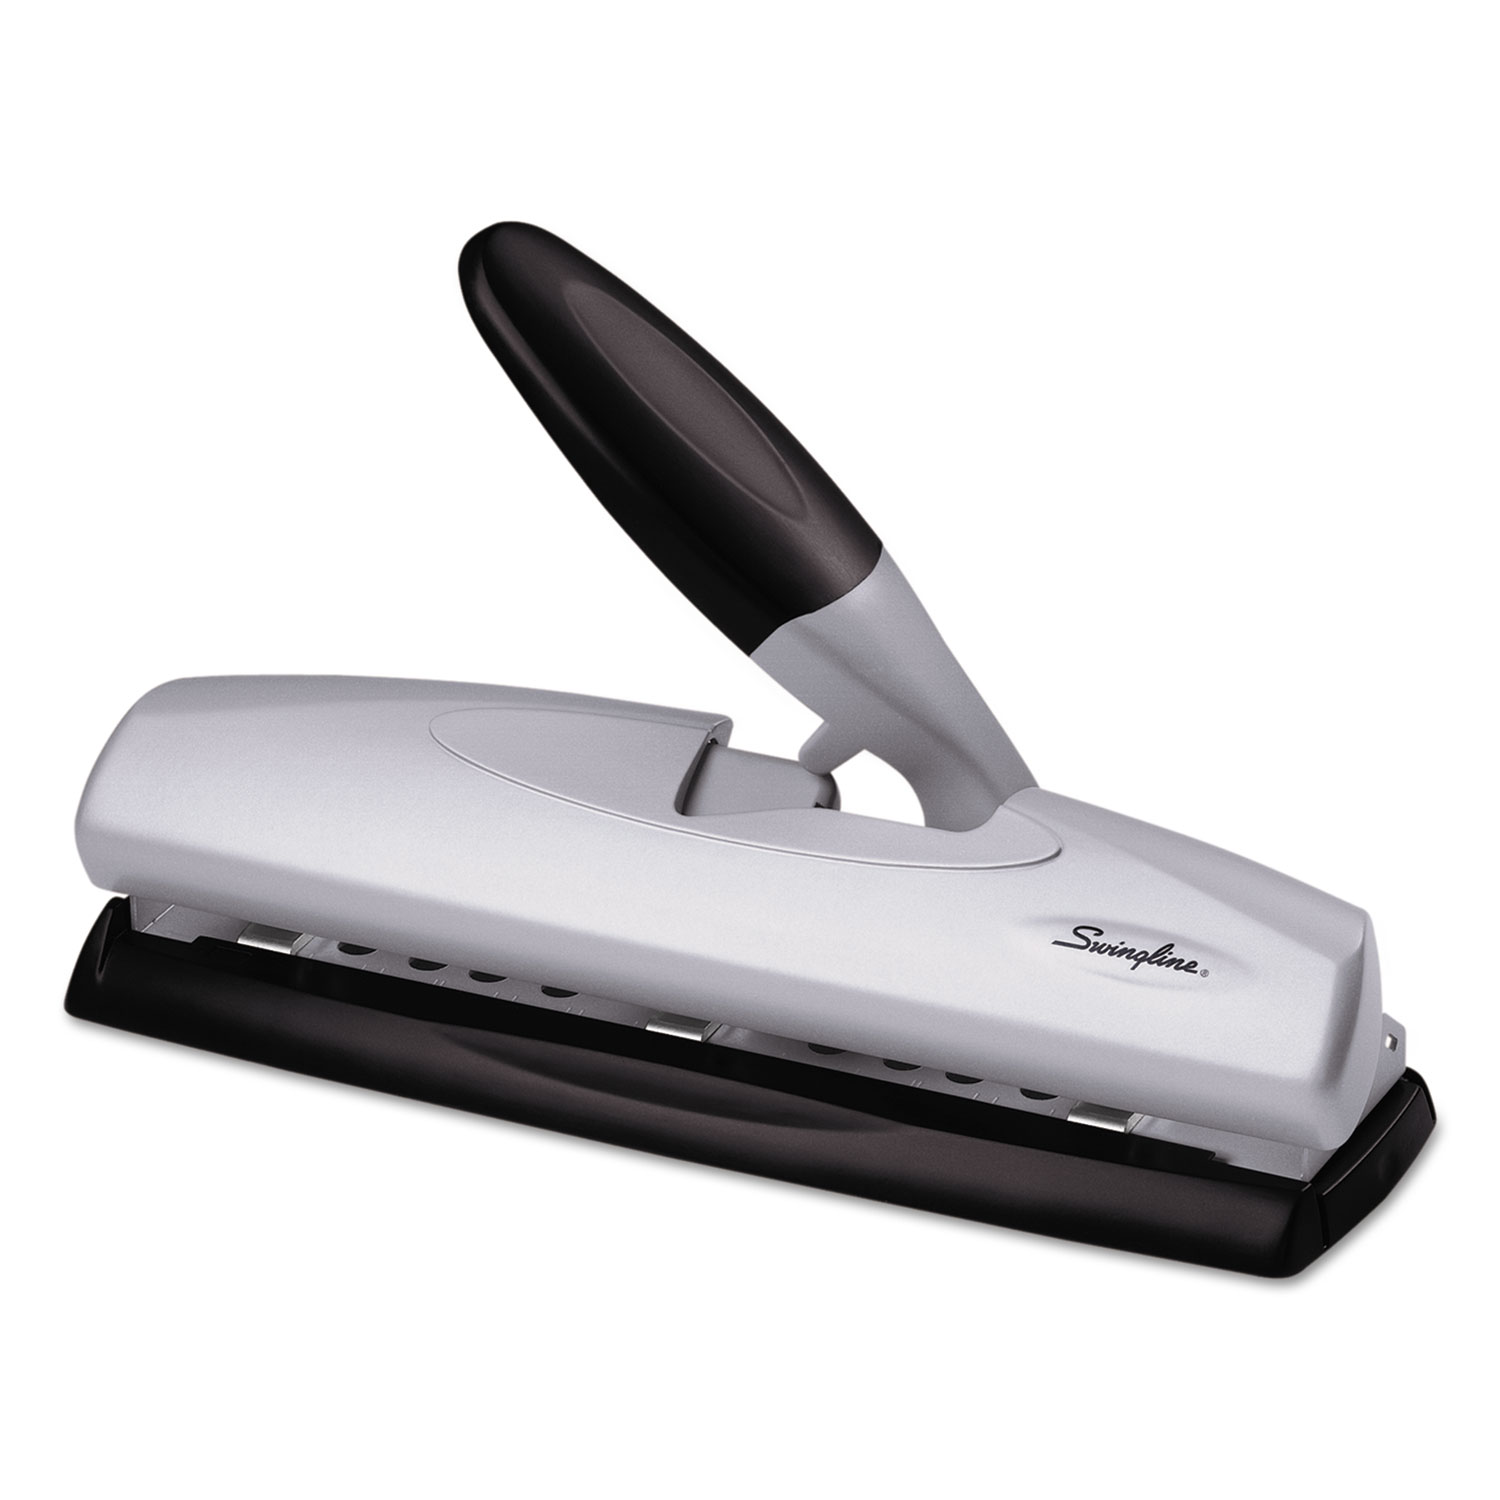 Bostitch Electric Or Battery Powered 3 Hole Punch BlackSilver - Office Depot